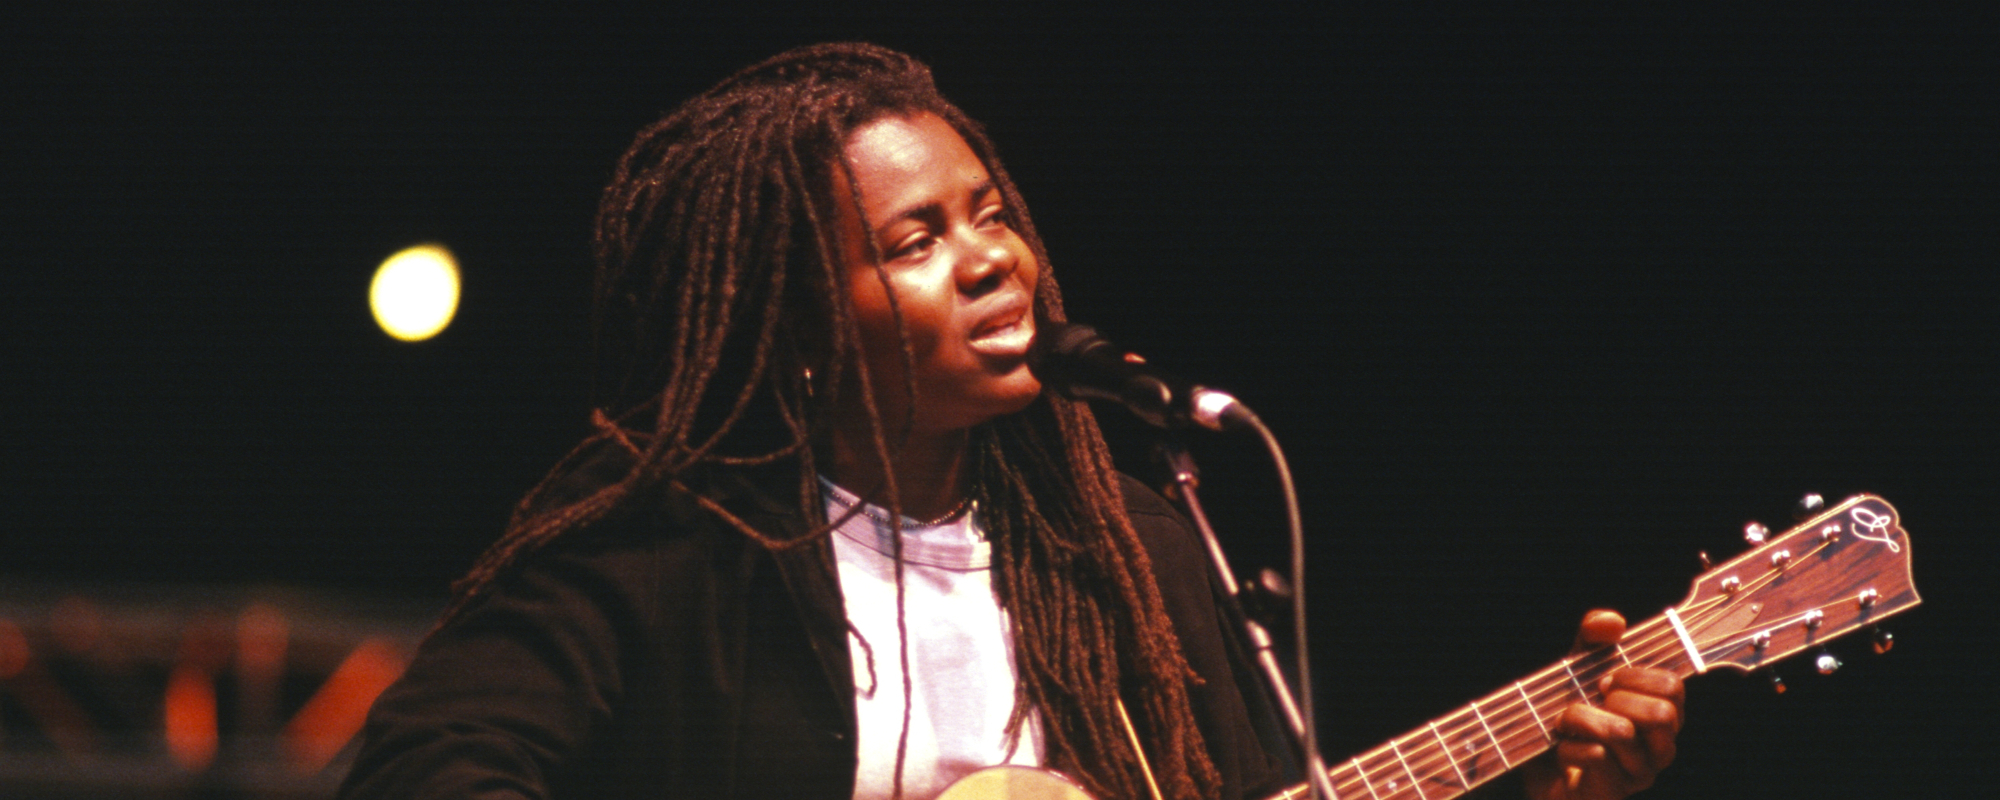 Tracy Chapman Discusses Luke Combs’ “Fast Car” Cover Reaching No. 1 on Country Chart